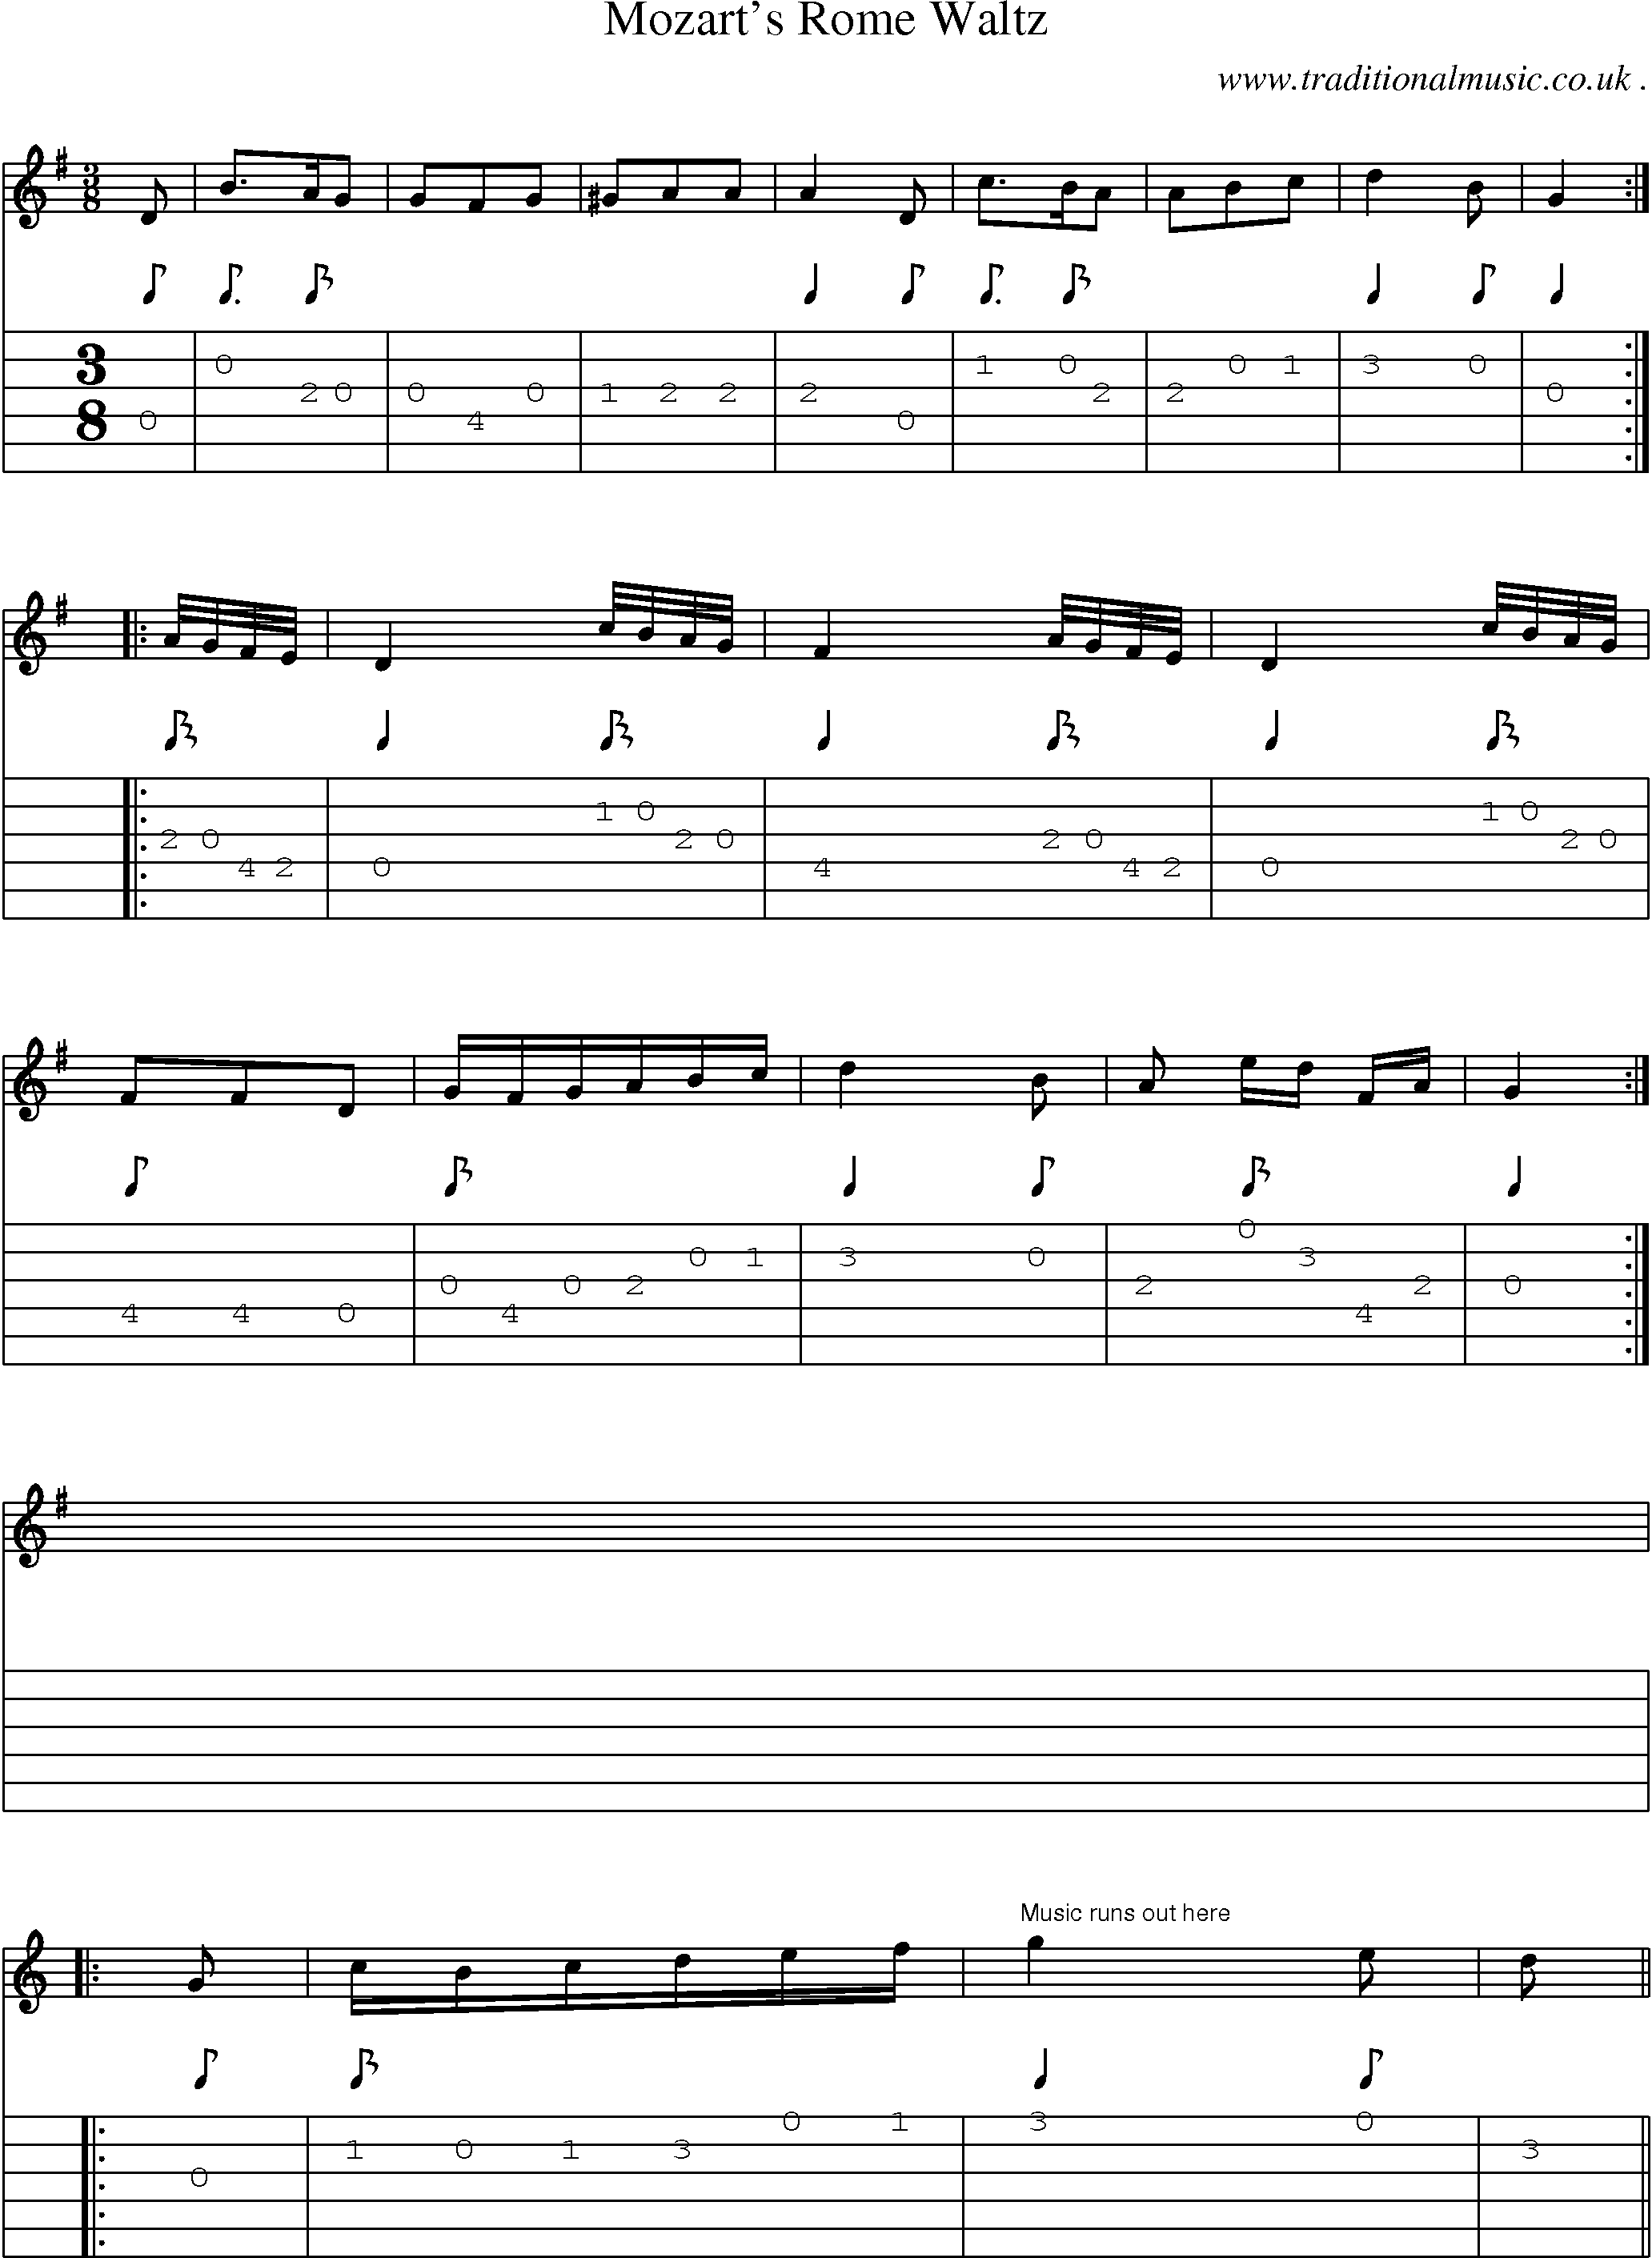 Sheet-Music and Guitar Tabs for Mozarts Rome Waltz